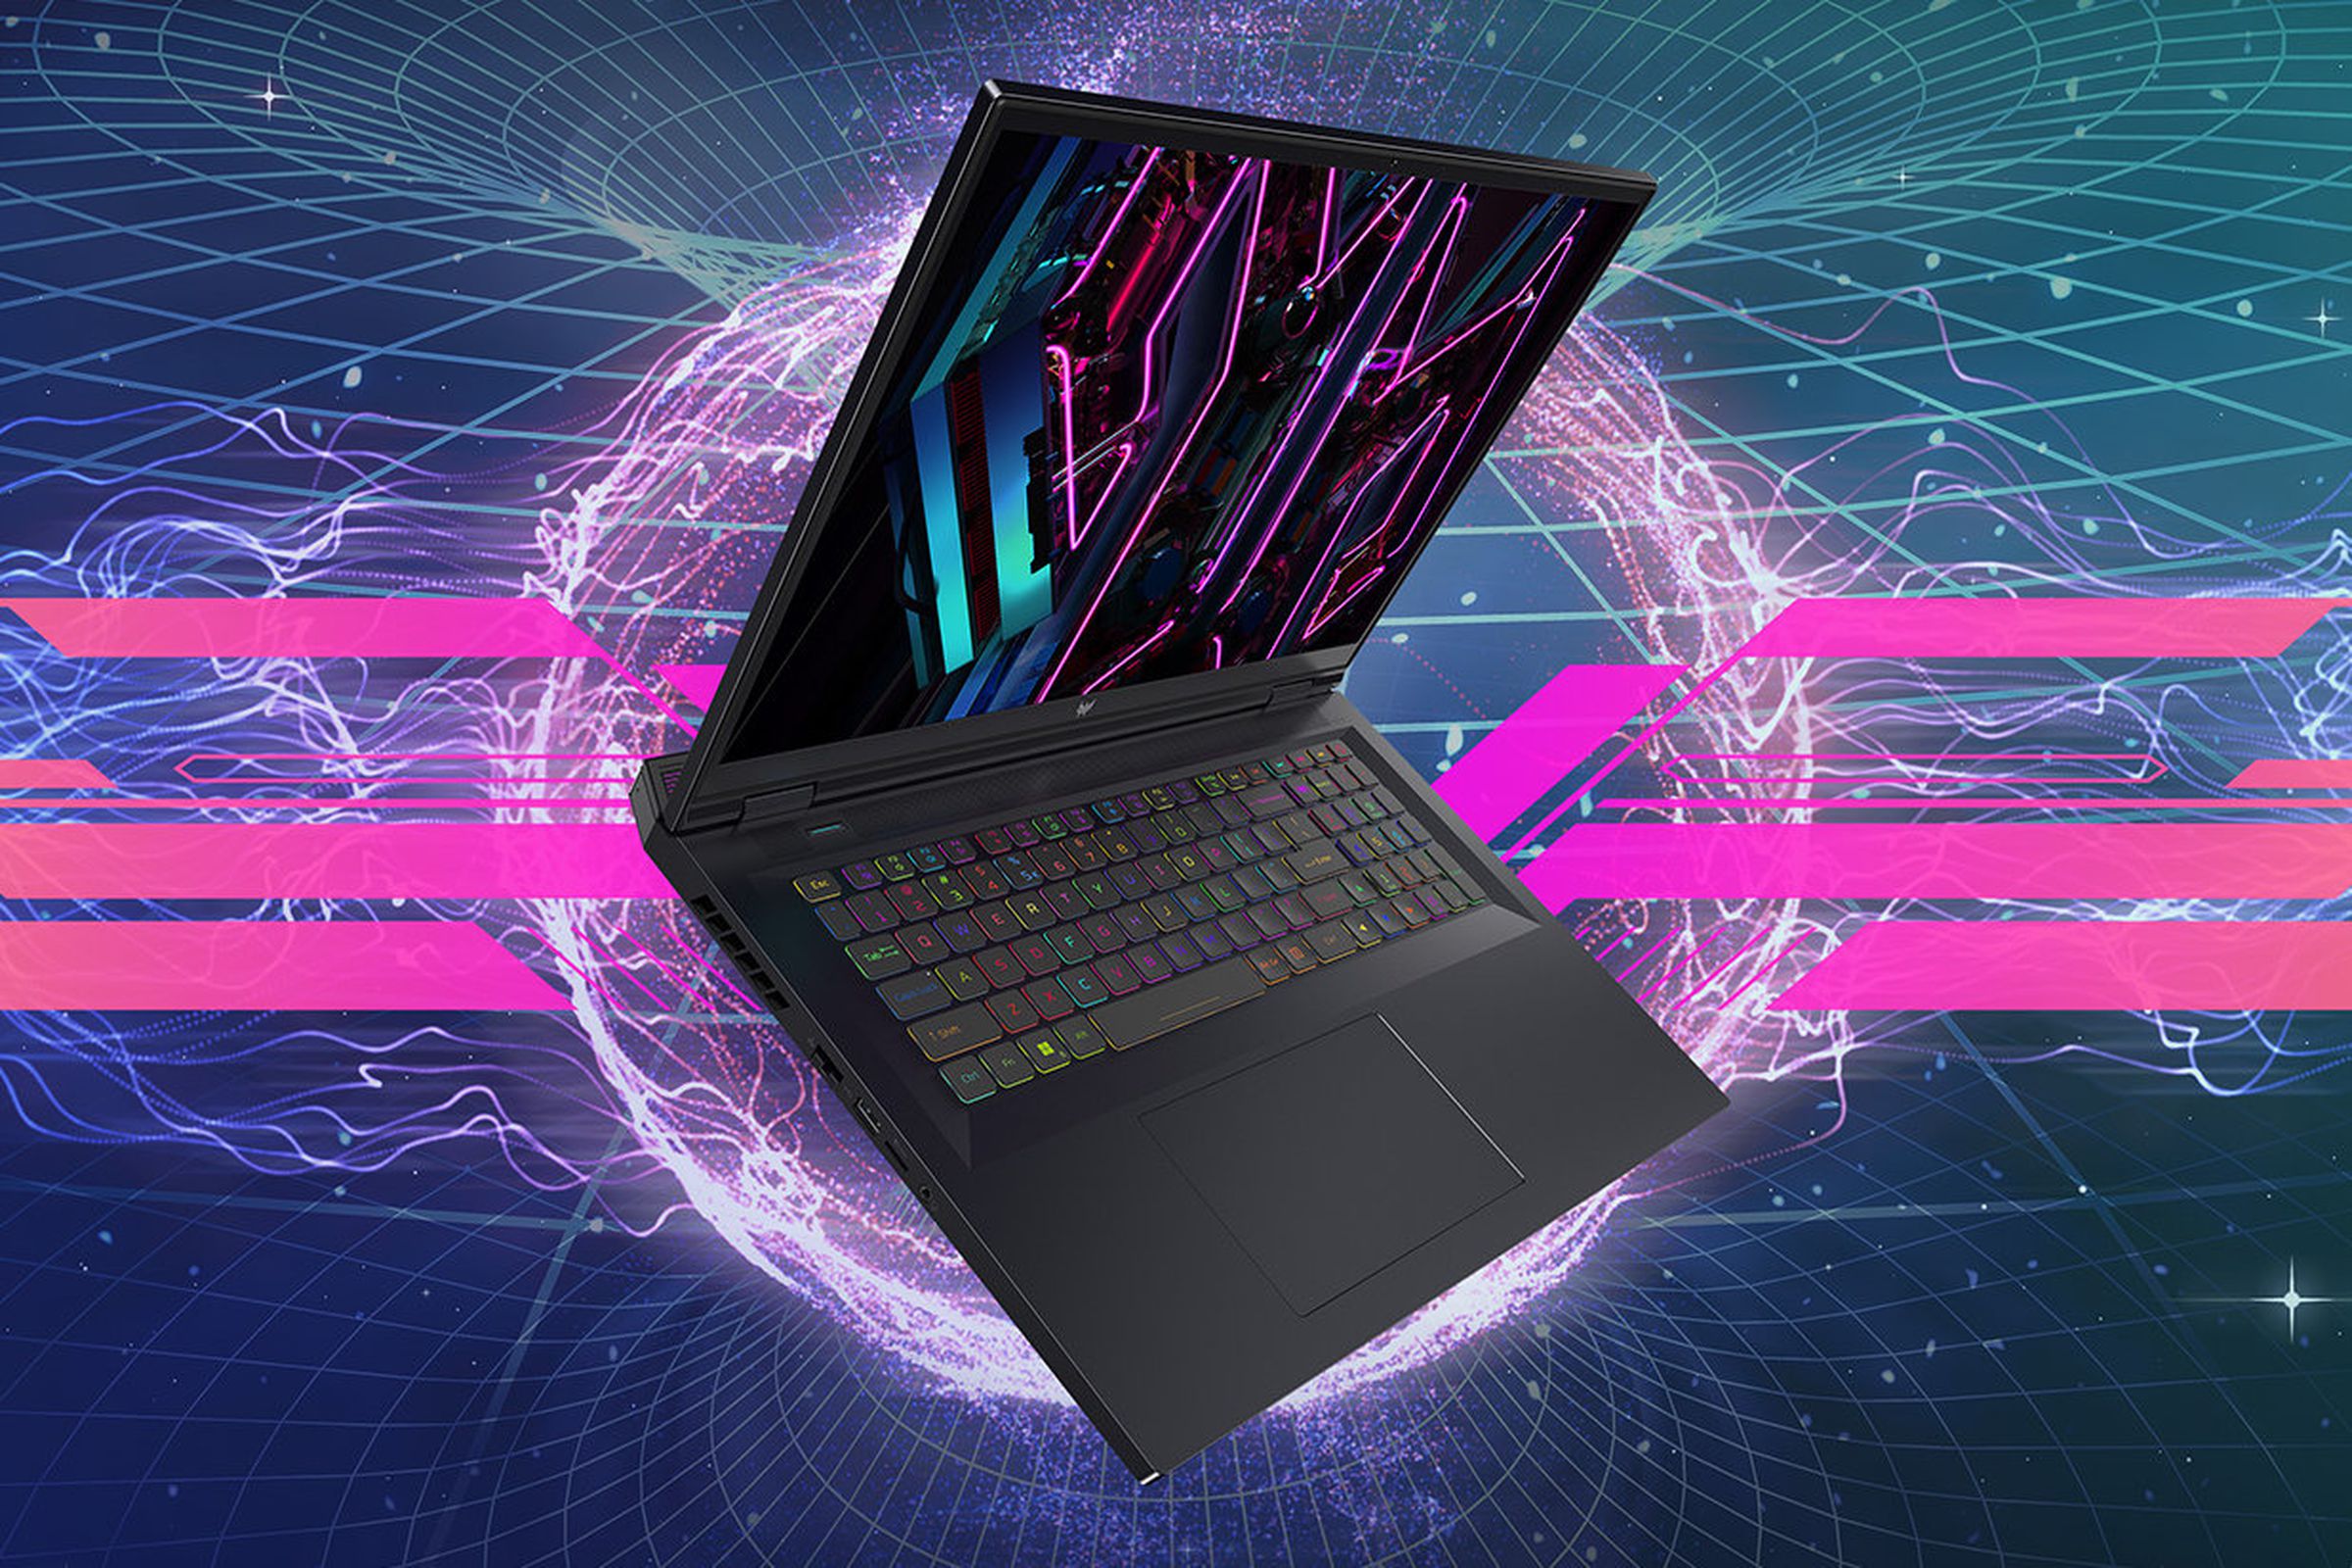 The Acer Predator Helios 18 revealing its screen and RGB-backlit keyboard.